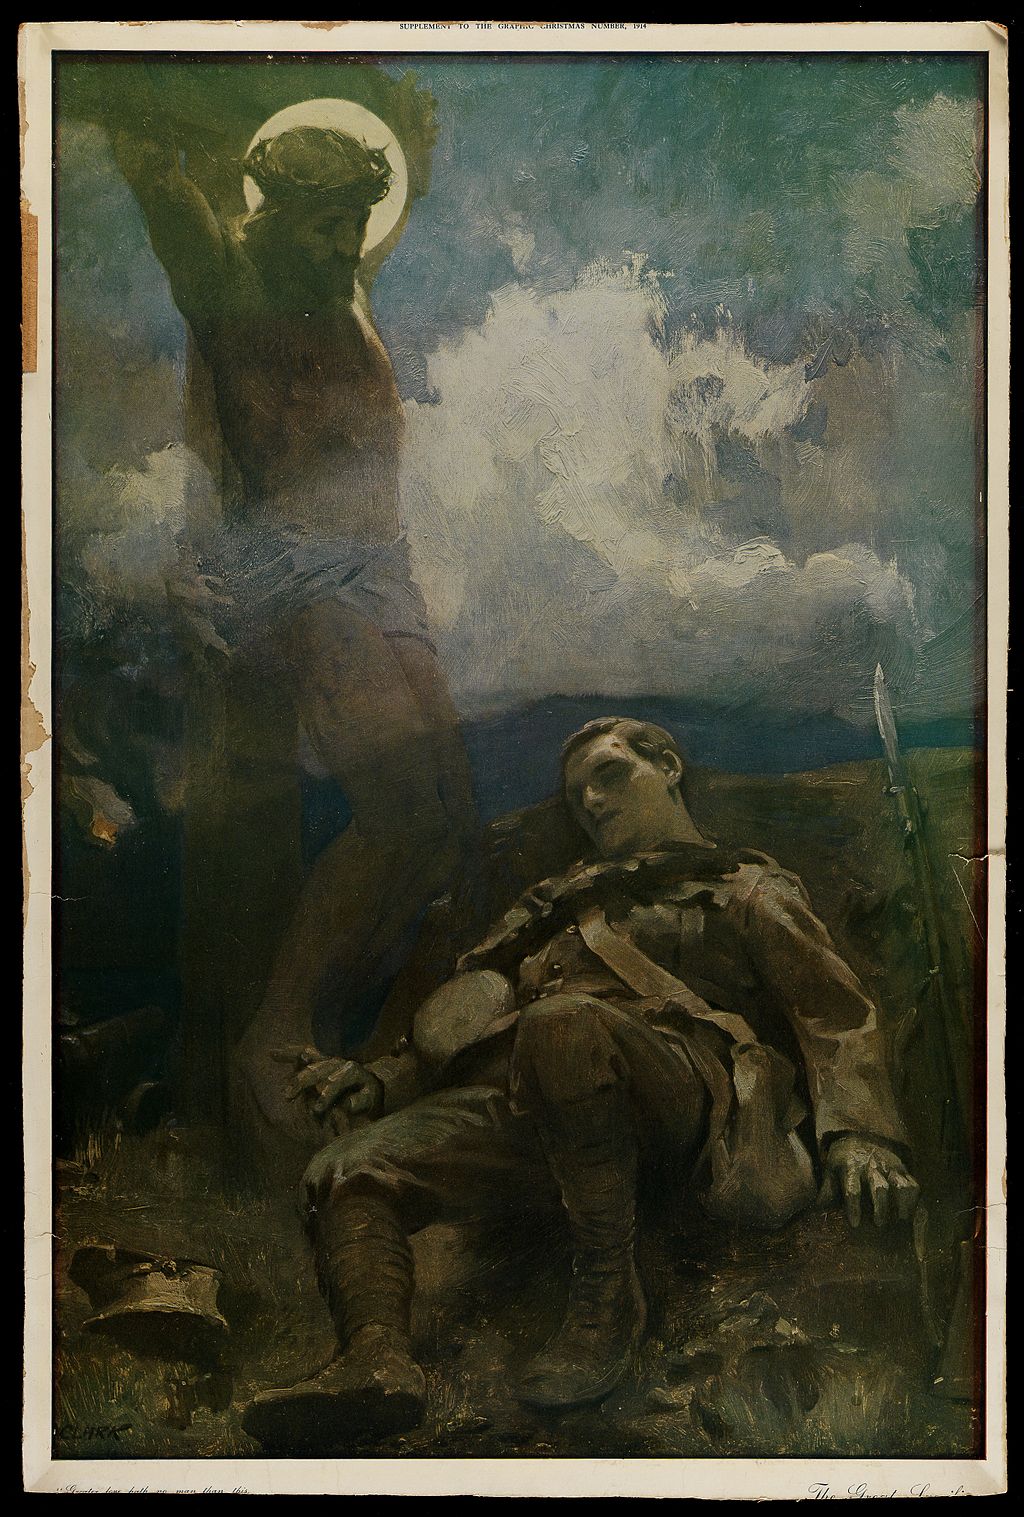 Painting, depicting a deceased soldier in the First World War overlooked by a Jesus Christ figure.